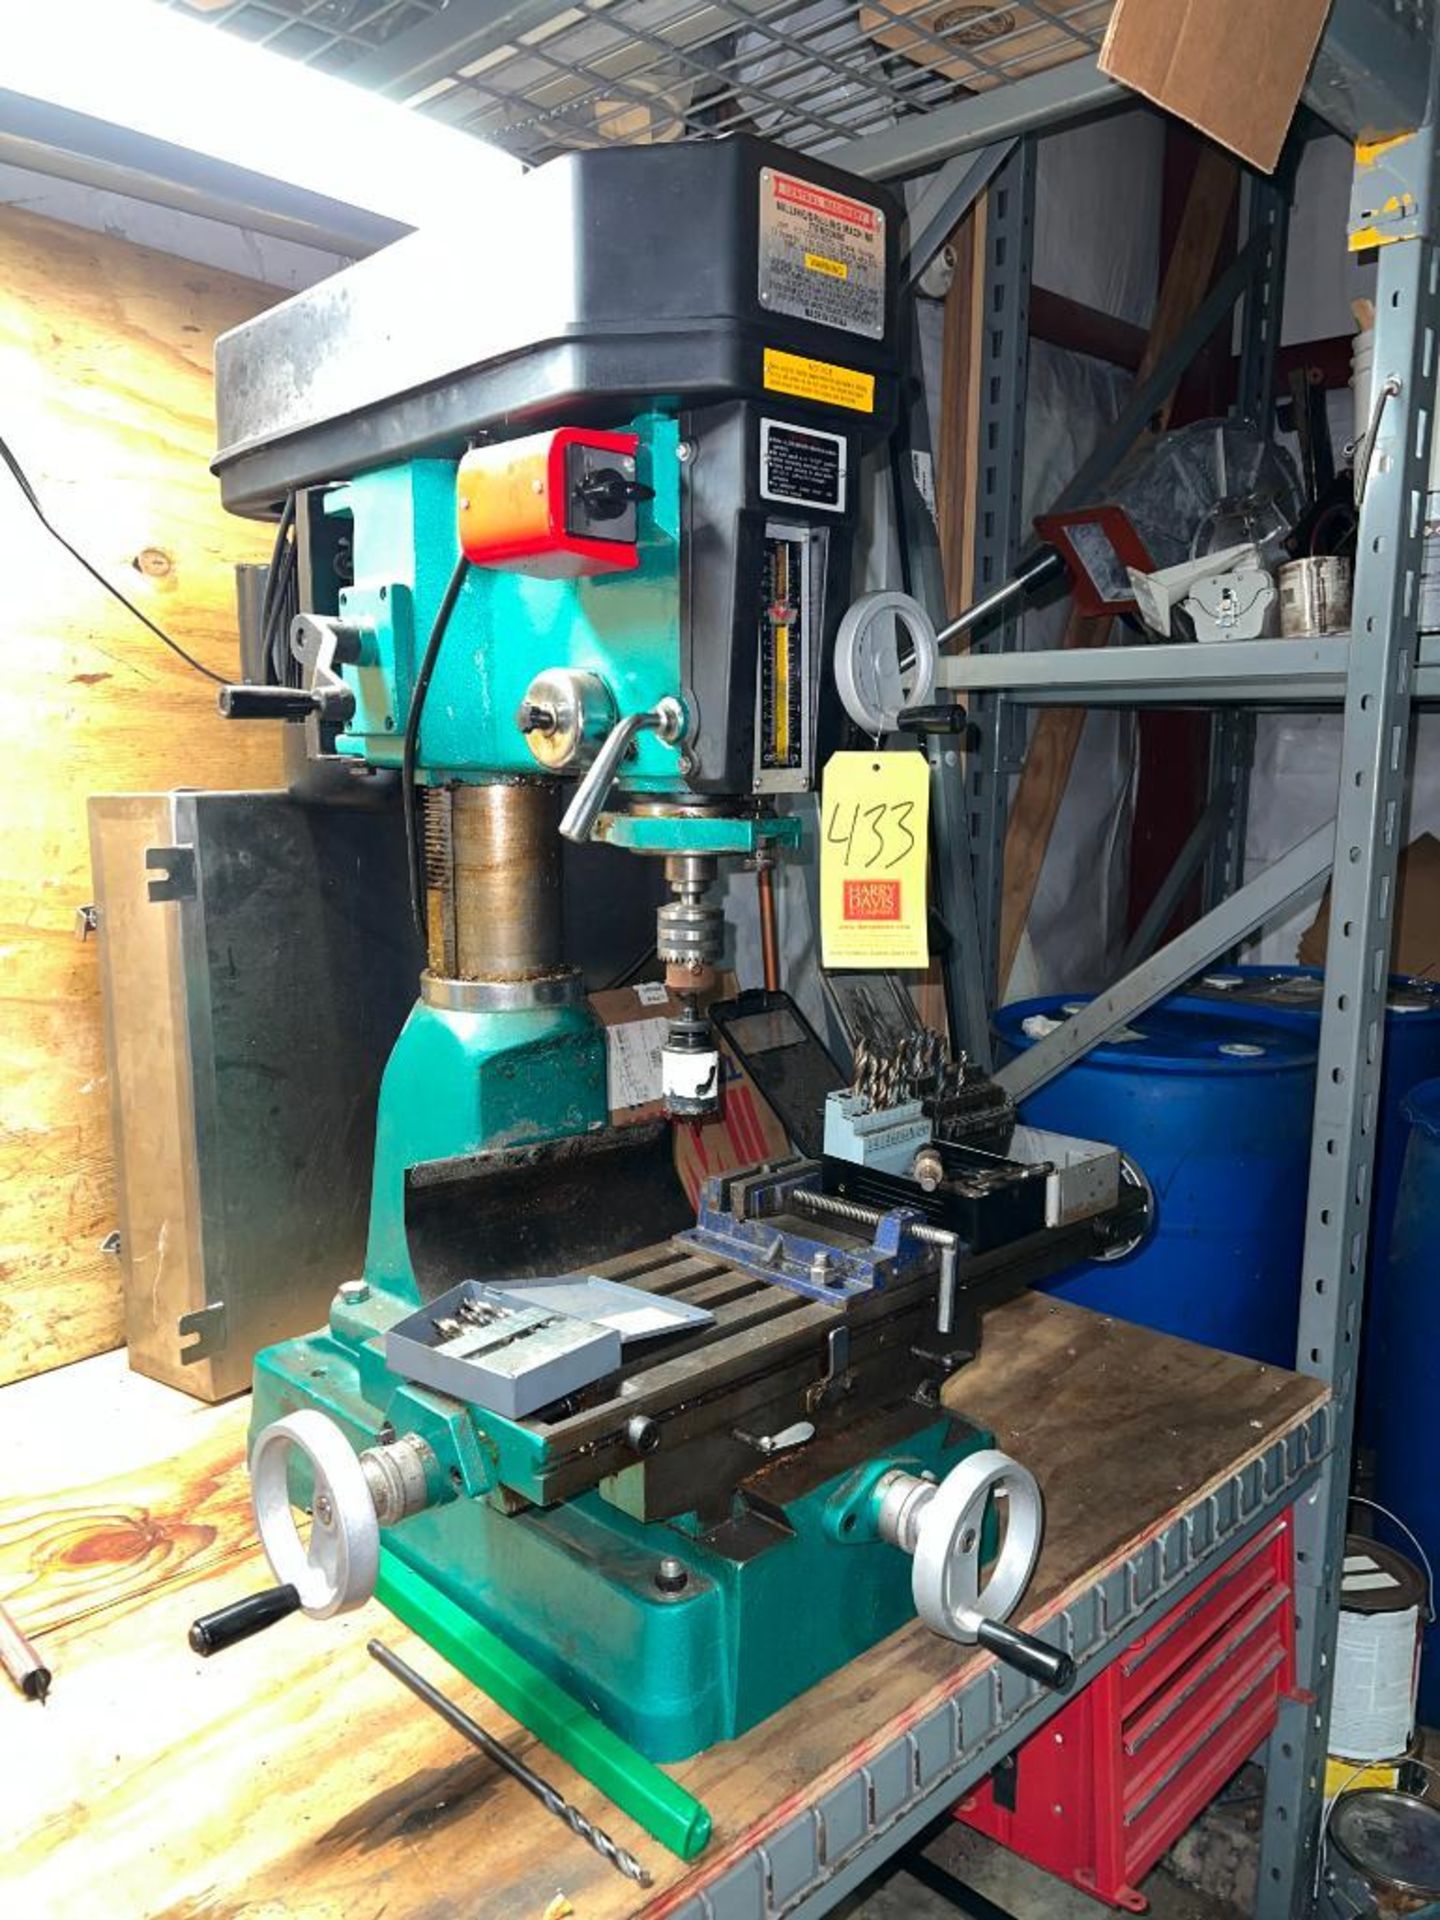 Central Machinery Milling/Drilling Machine, 2 HP Motor with Assorted Bits - Rigging Fee: $50